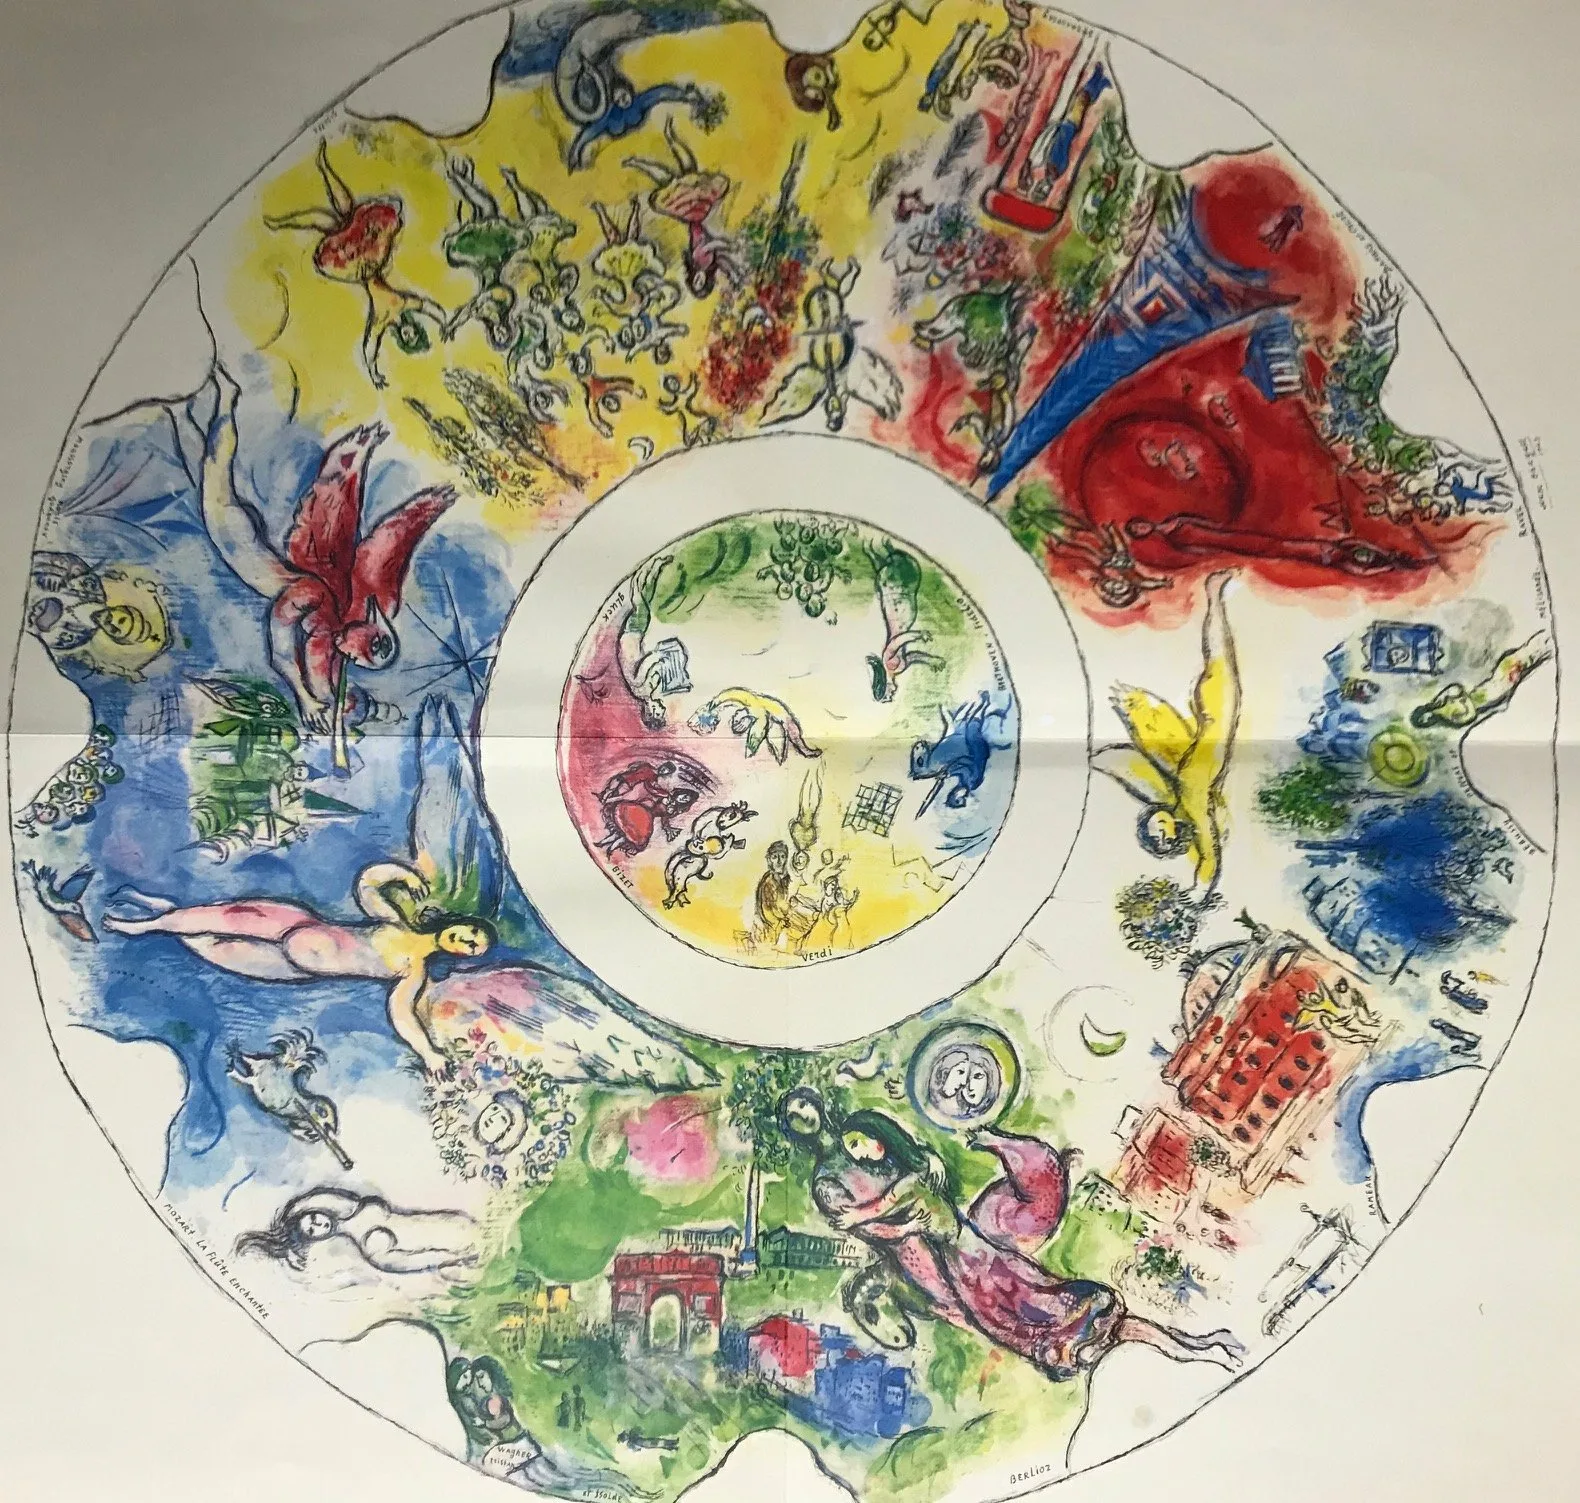 Chagall "Plafond" Print folded as issued - Ceiling of Paris Opera 1966